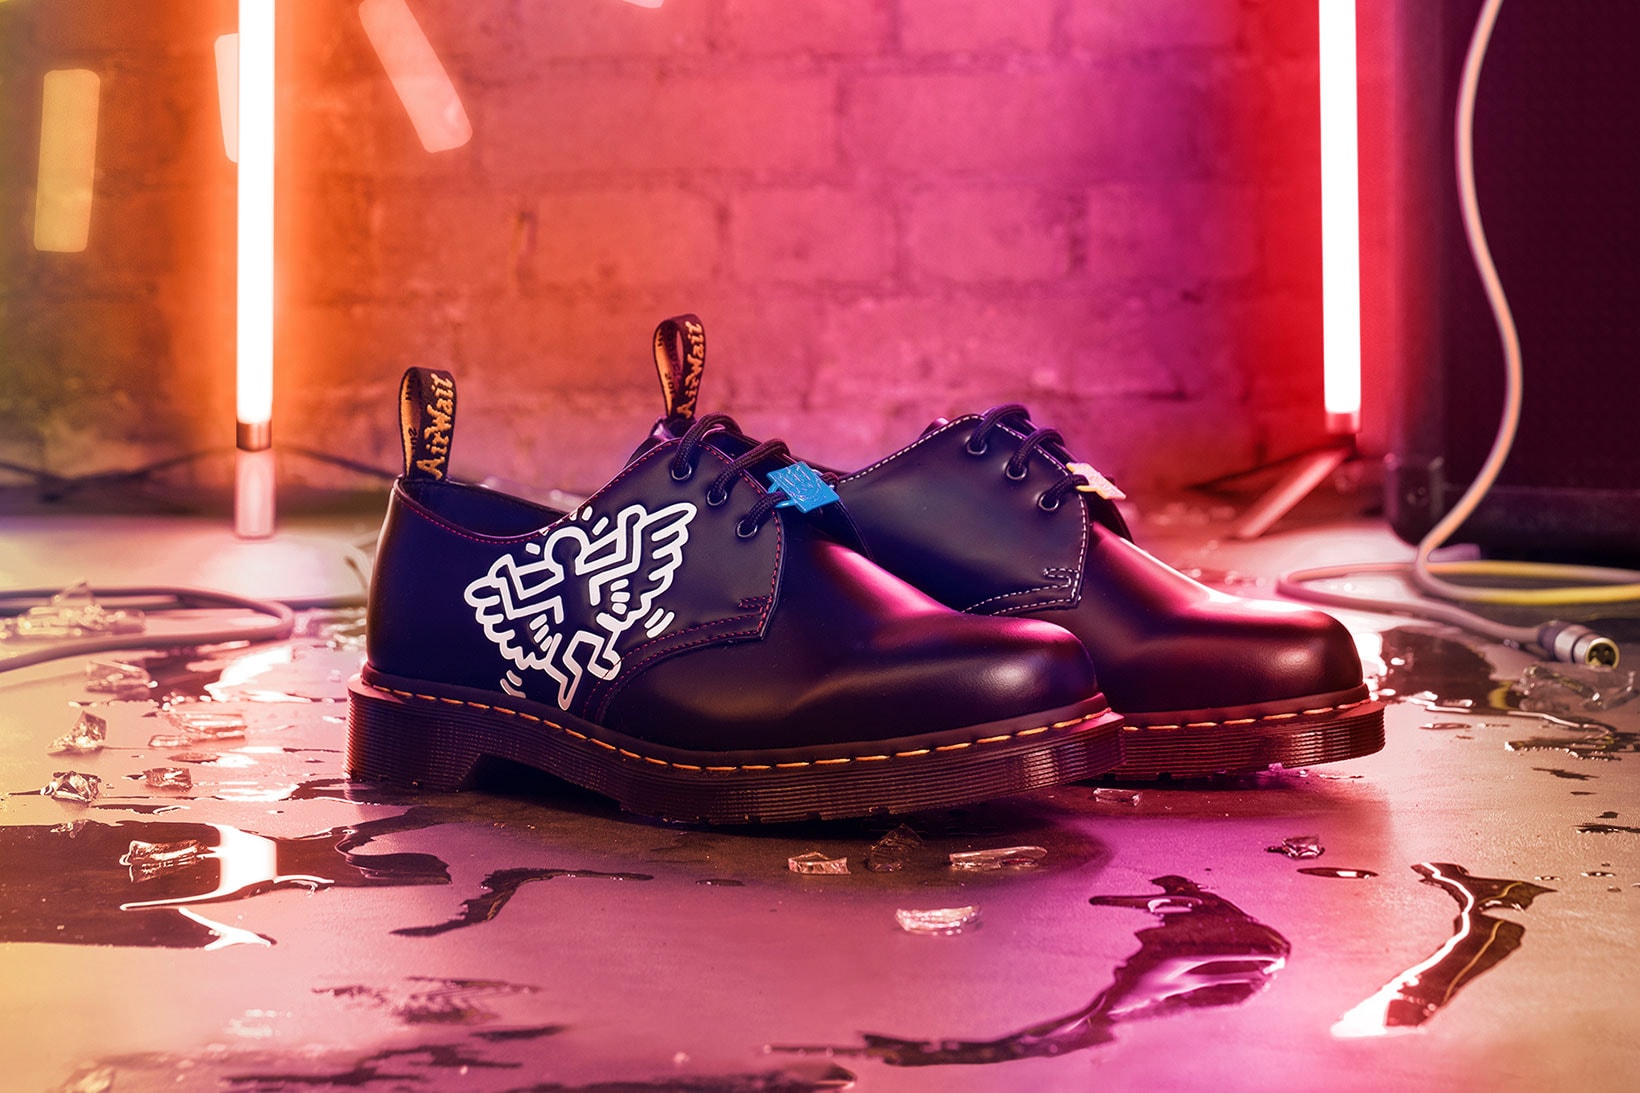 Dr. Martens Keith Haring Collaboration Boots Shoes 1461 Black Patterns Illustrations Derby Neon Light